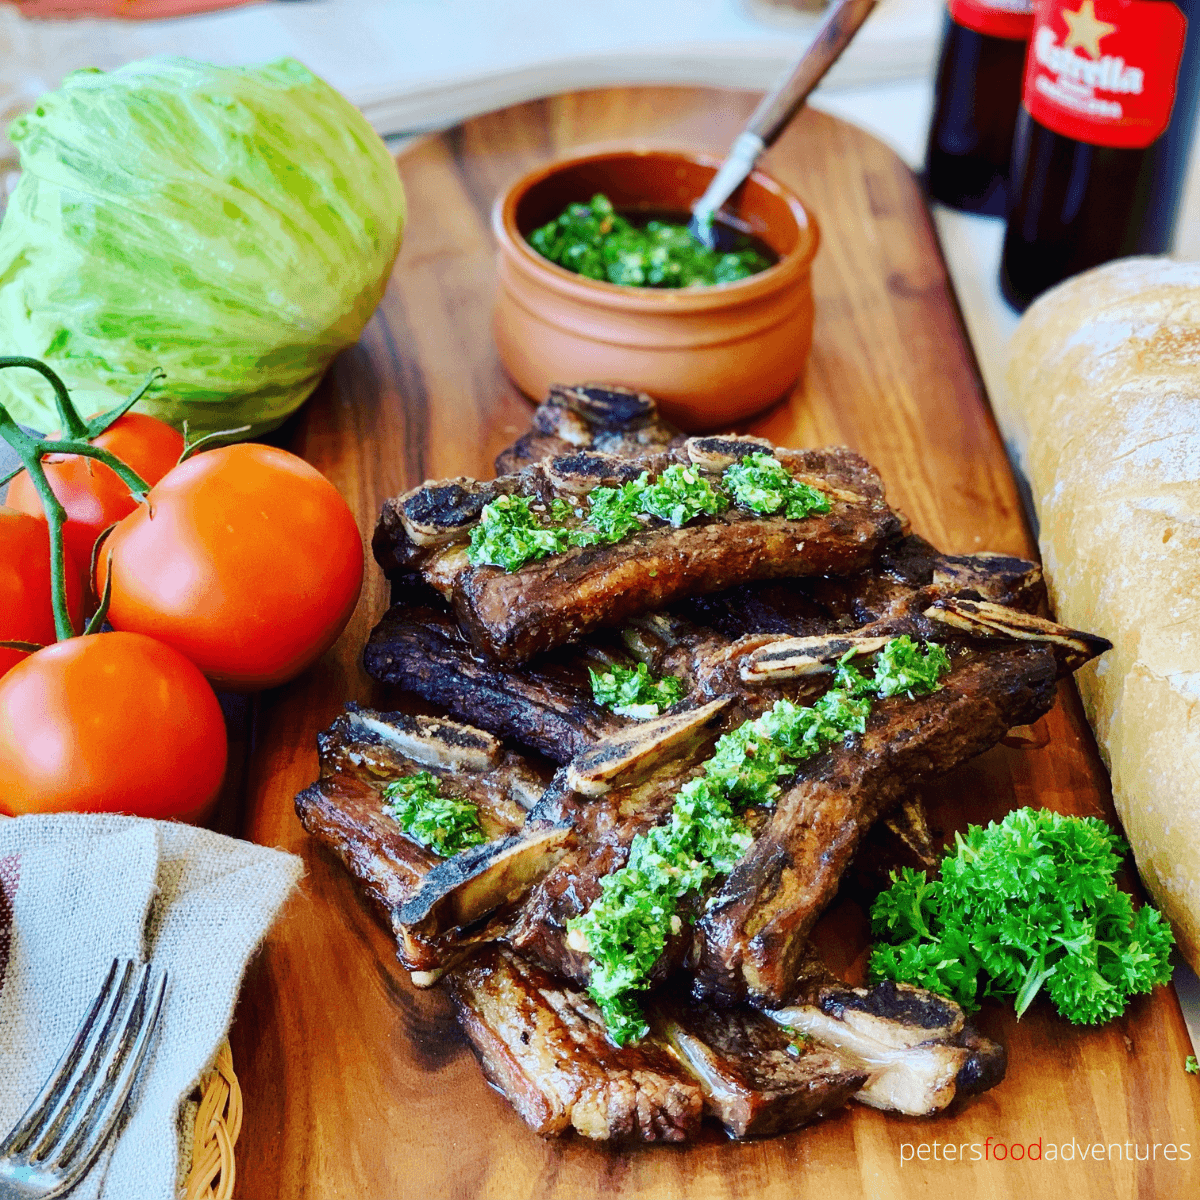 Argentine Bbq Beef Ribs - Asado style is a tasty way to enjoy your short cut ribs this summer. Flanken-style short ribs, cut cross the bone and bbq'd to perfection. Served with homemade Chimichurri sauce.